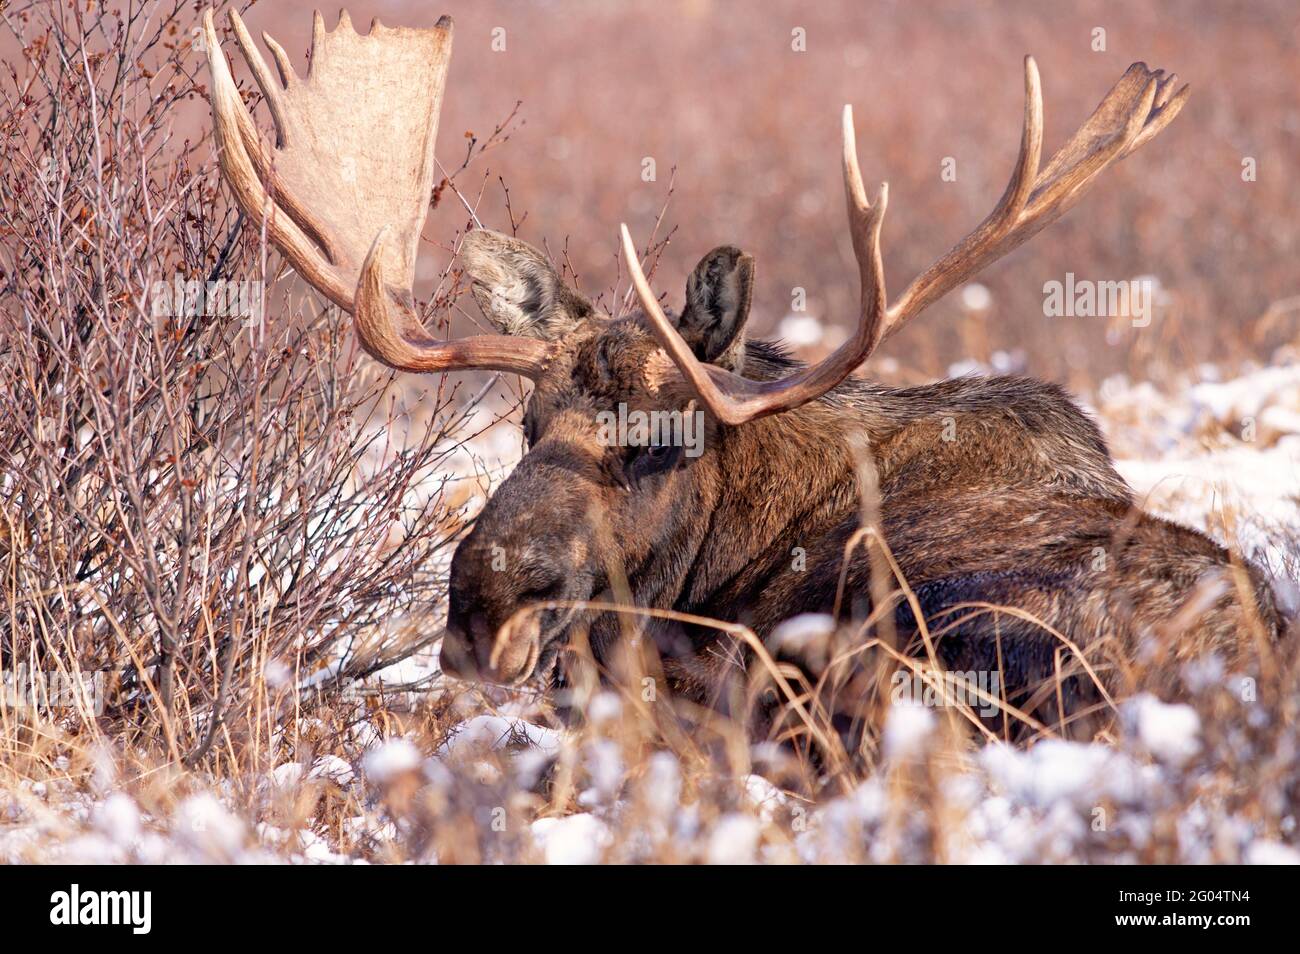 A large Alaska bull moose lies alert in its bed after the season's first snowfall. Stock Photo